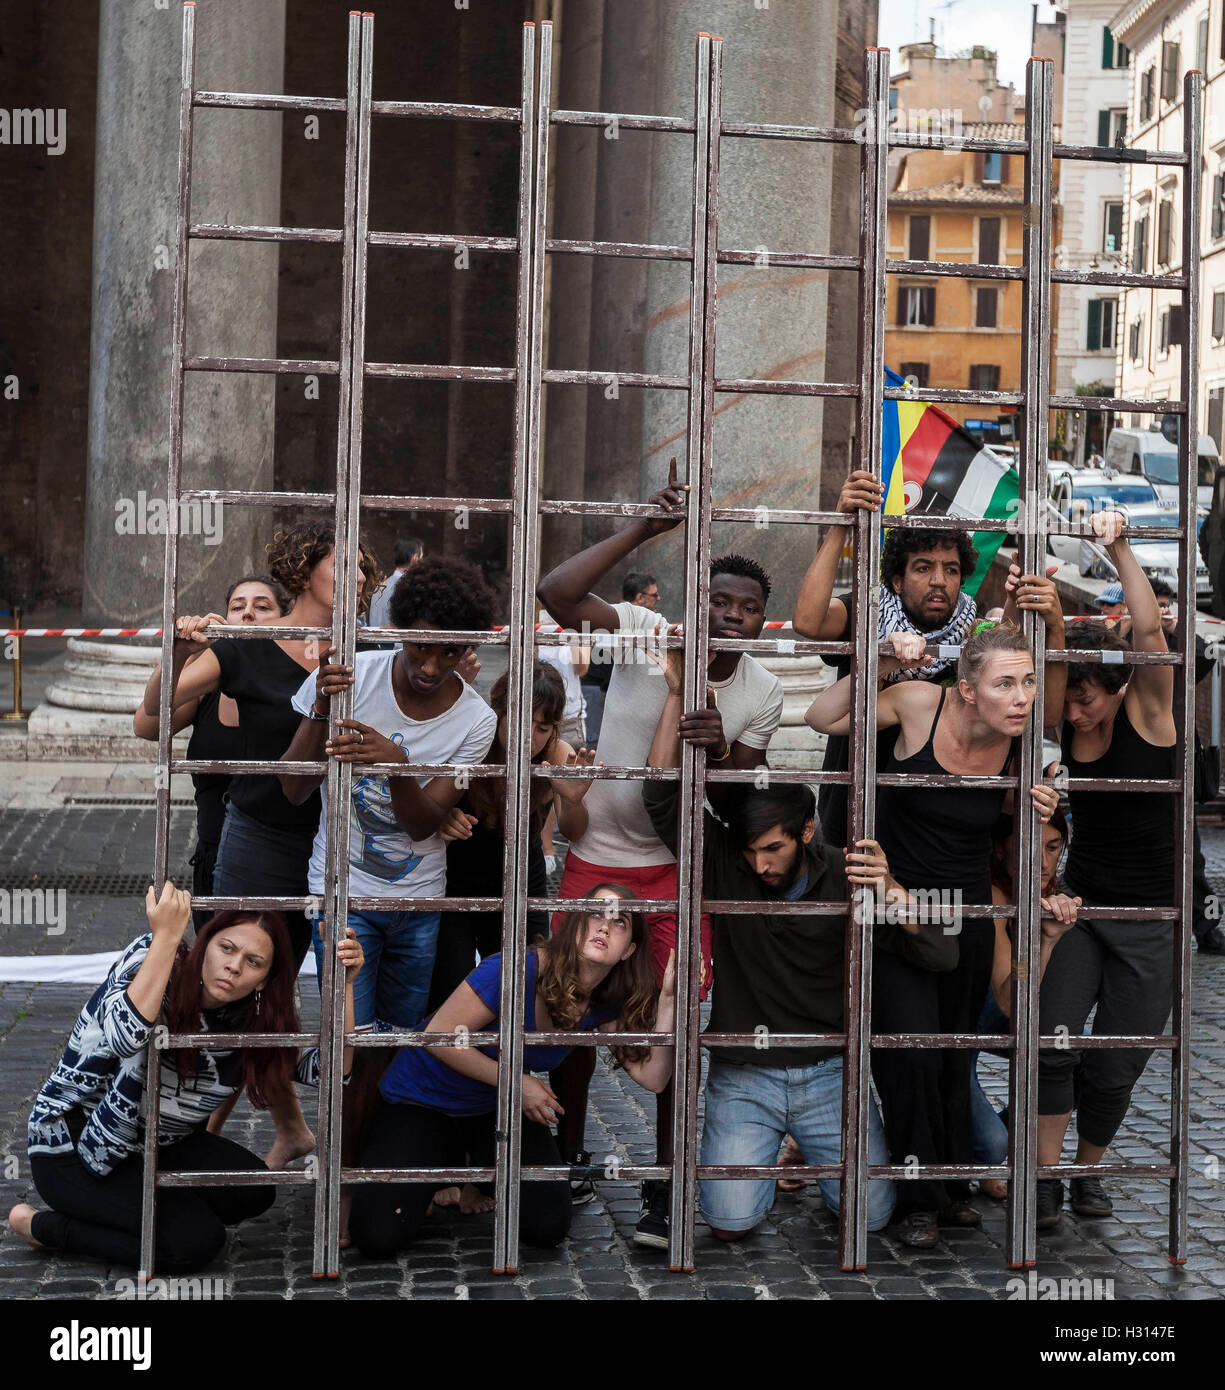 Rome, Italy. 03rd October, 2016. Members of ARCI association hold a 'flashmob' in Pantheon Square to remember the victims of immigration in Rome, Italy on October 03, 2016. The Italian Republic recognises 3 October as National Day in memory of the victims of immigration, commemorating those “who lost their lives trying to emigrate towards our country to escape wars, persecution and poverty”. The day is chosen to pay respect to the 366 migrants who drowned on October 3 2012 in the Mediterranean in view of the Sicilian Island of Lampedusa. Credit:  Giuseppe Ciccia/Alamy Live News Stock Photo